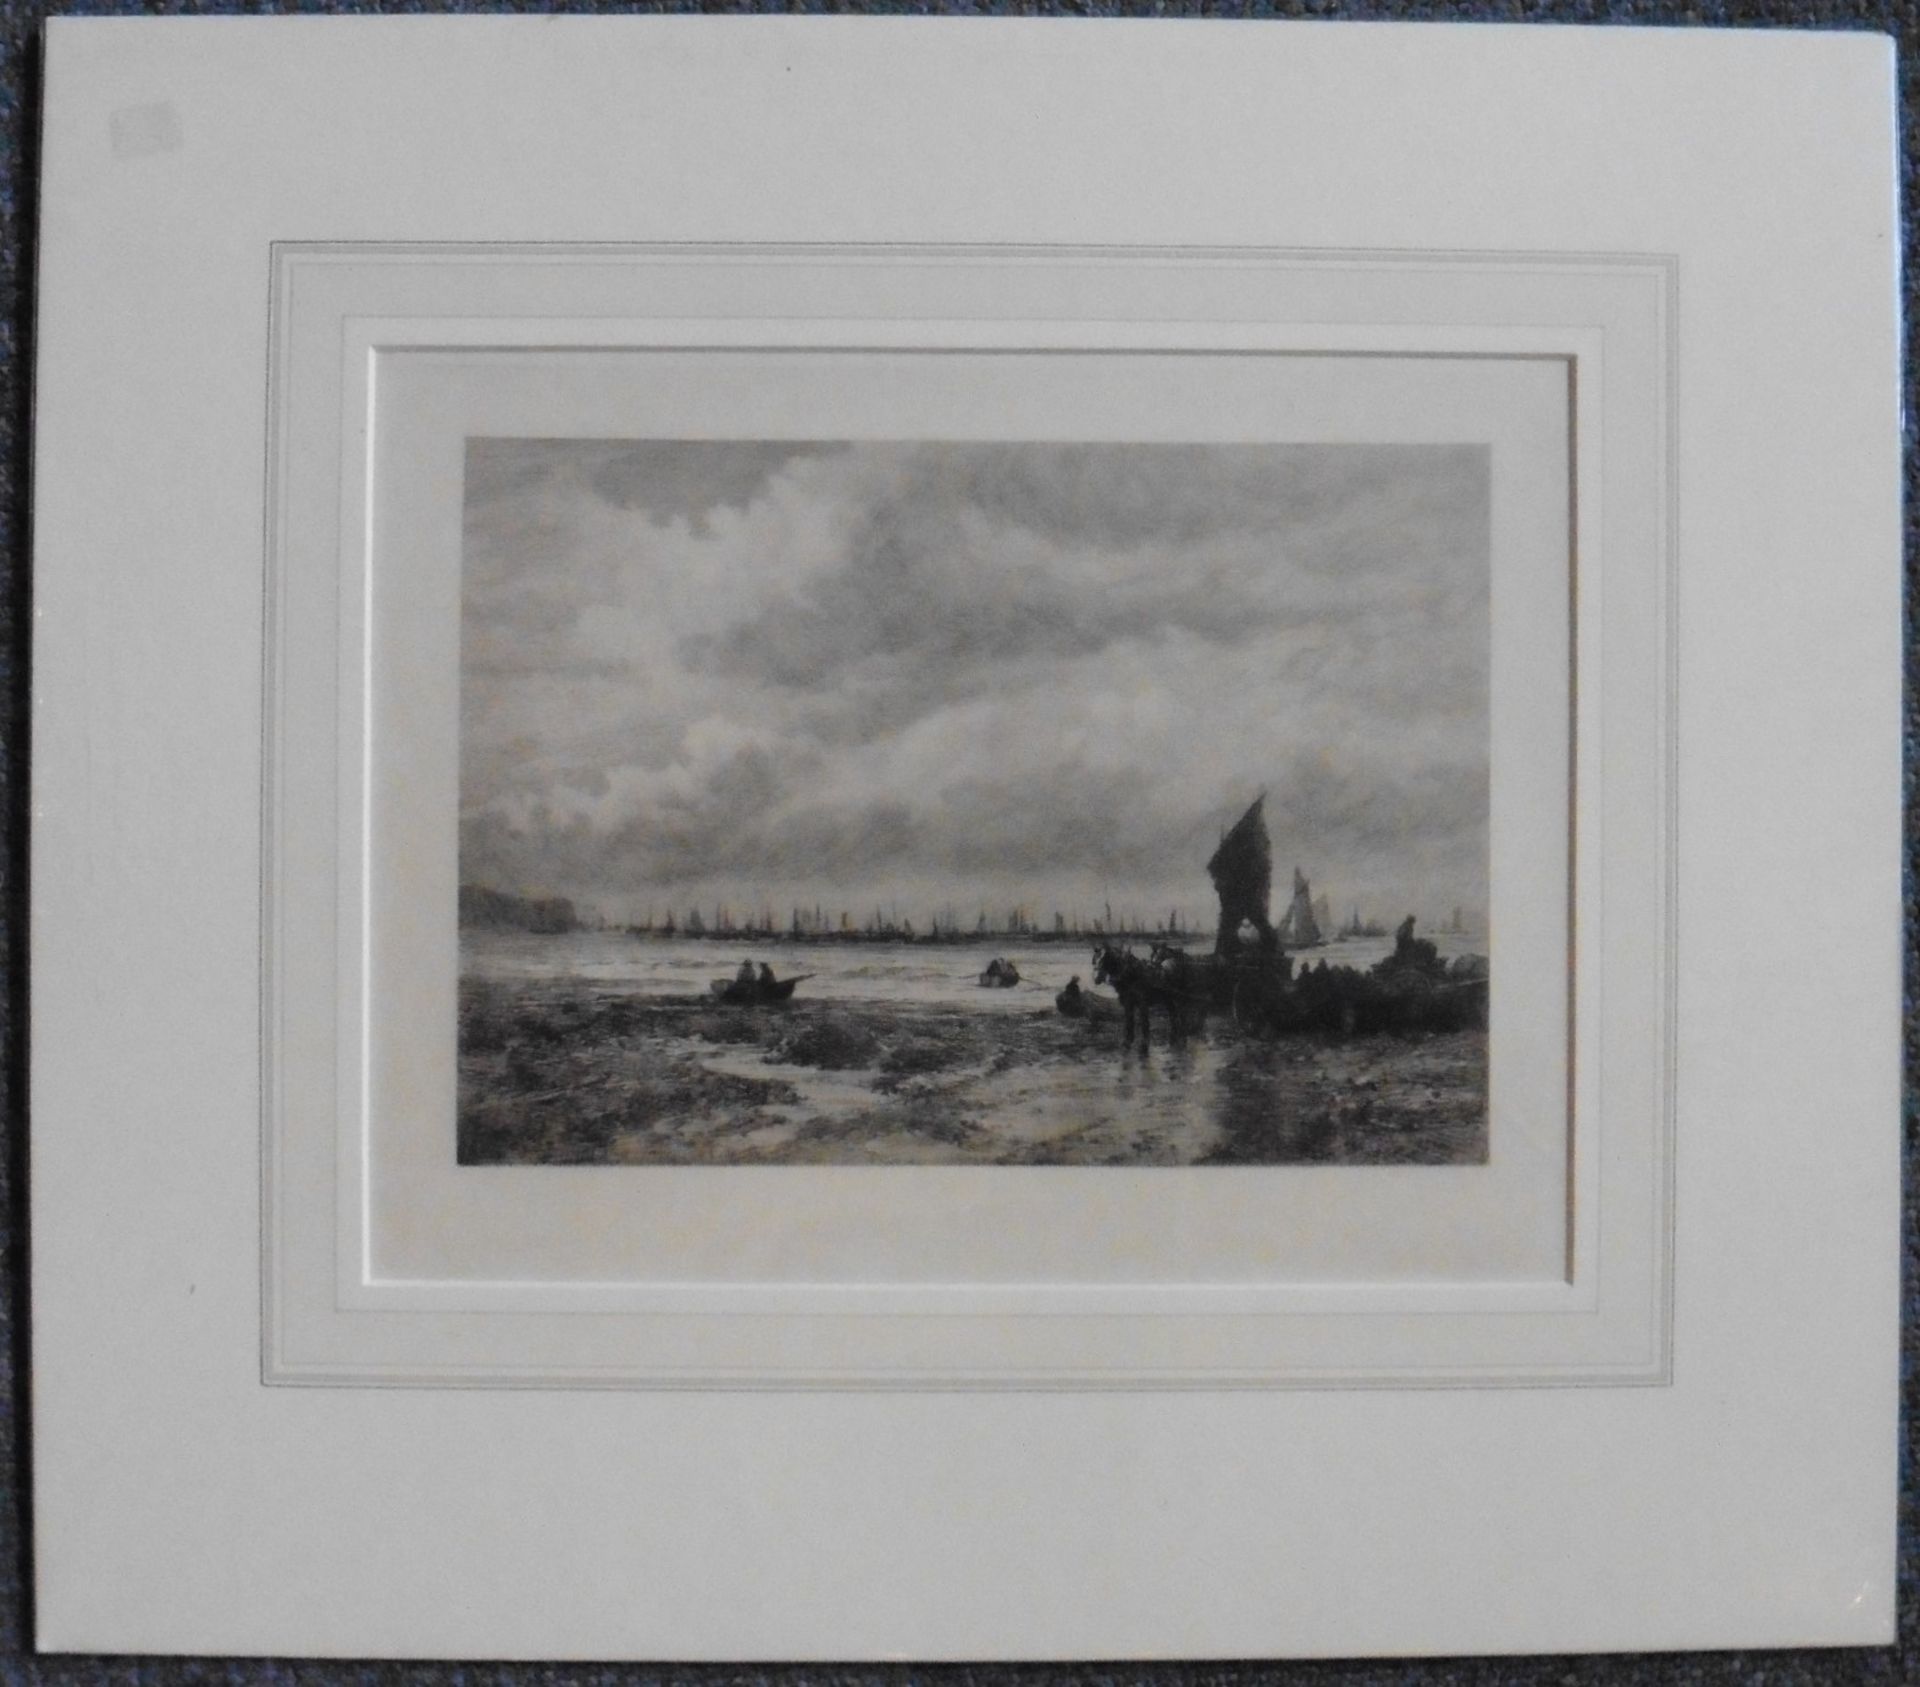 Unsigned engraving circa 1900 “Mussel collecting on the shore” - Image 3 of 3